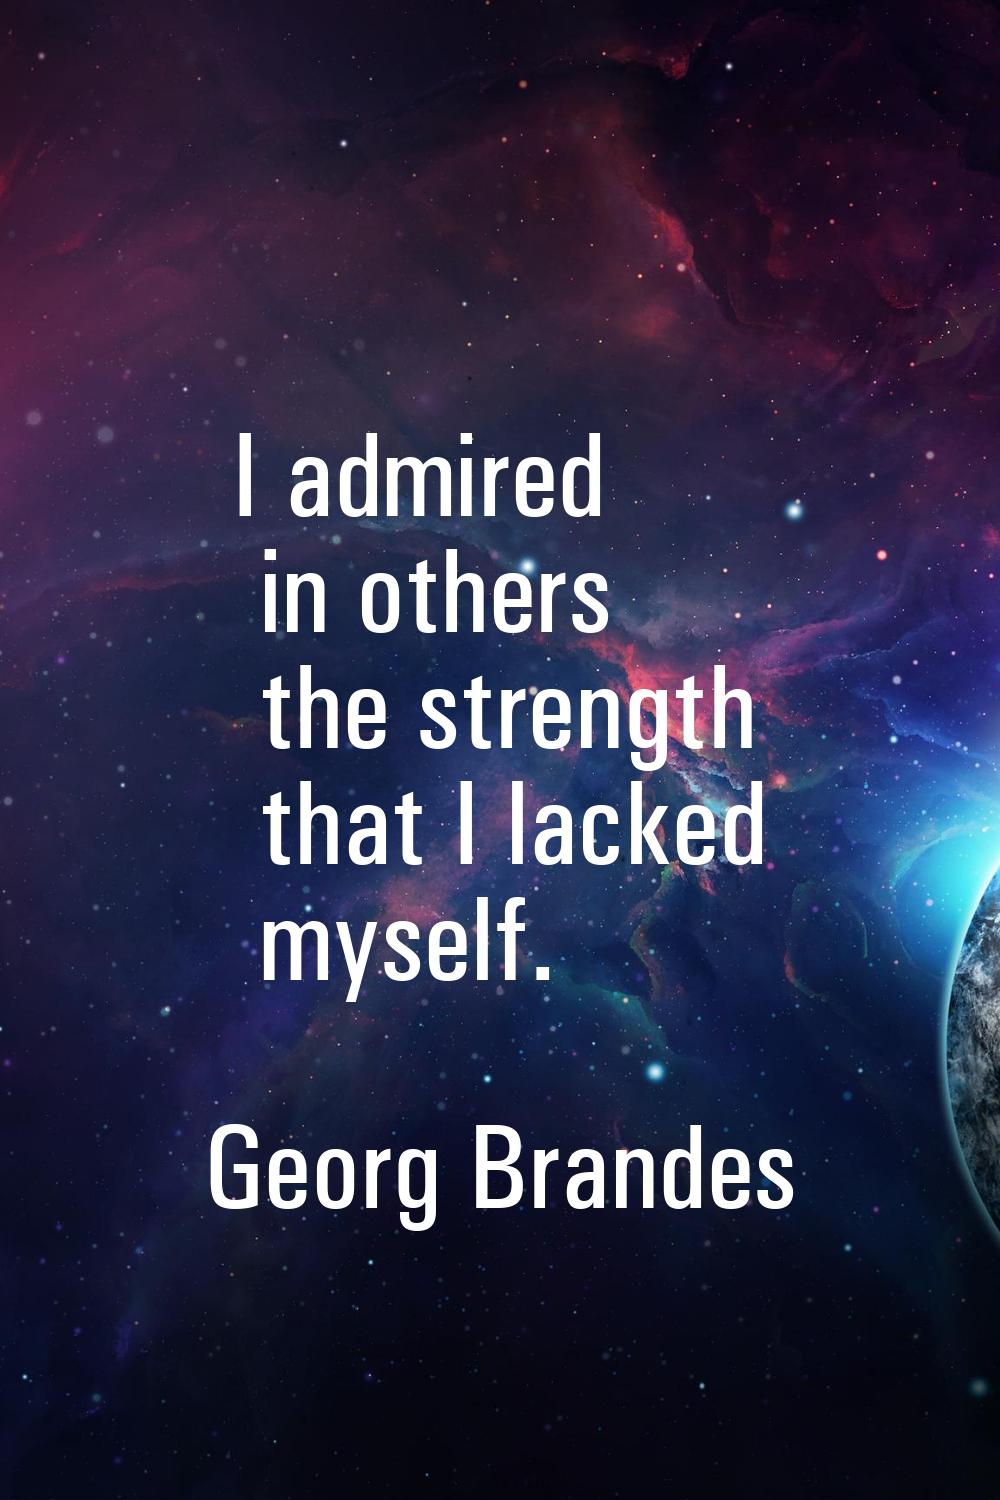 I admired in others the strength that I lacked myself.